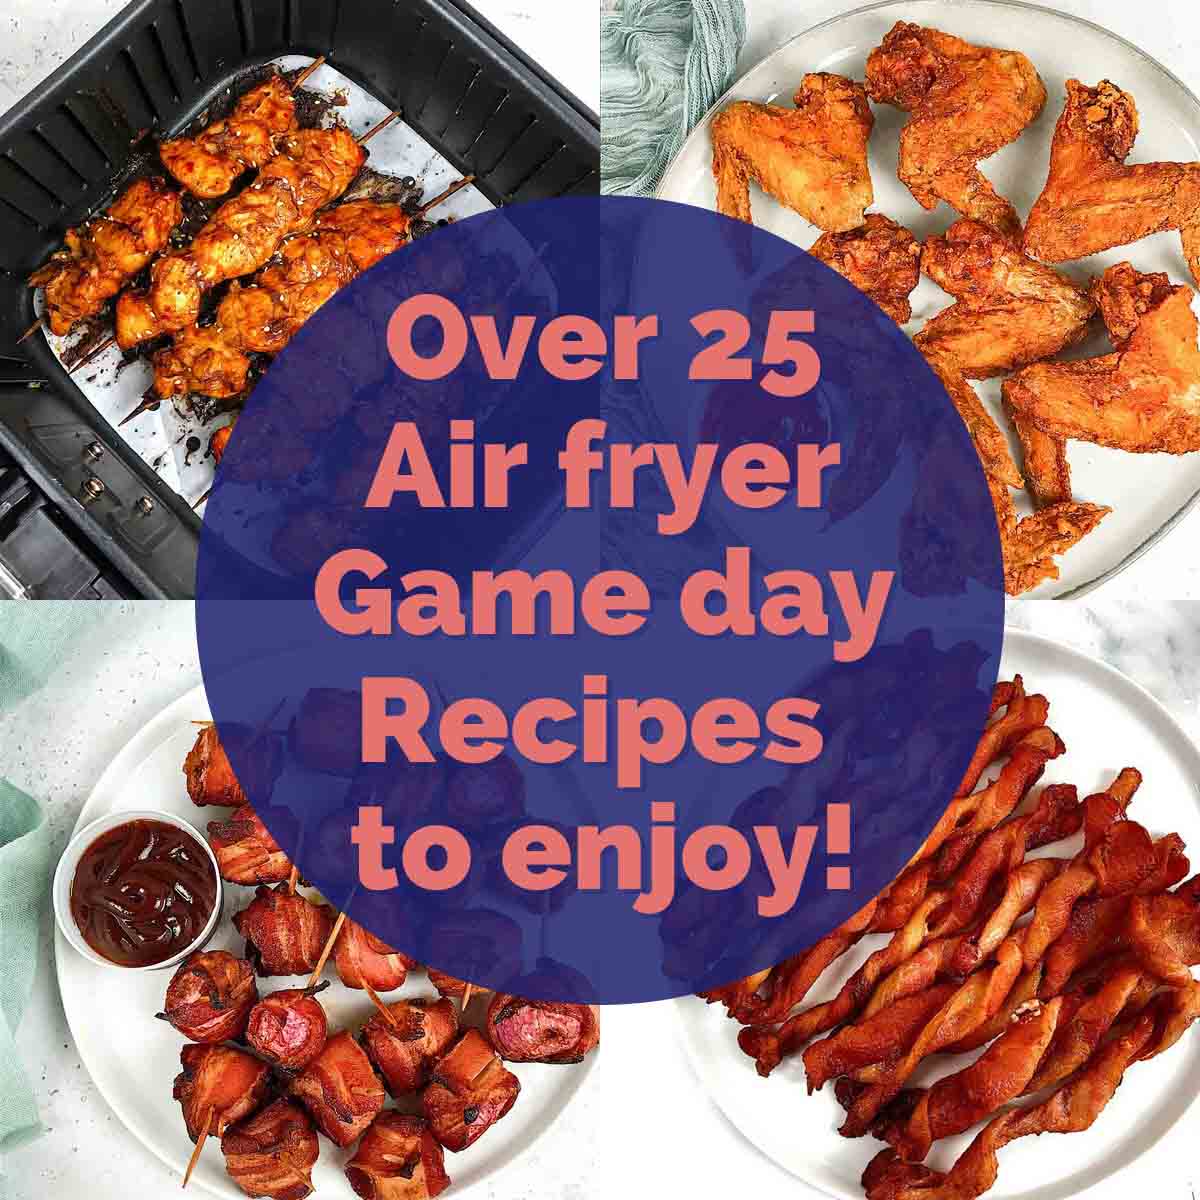 The Big Game is Feb. 7: Check out these air fryers to make these